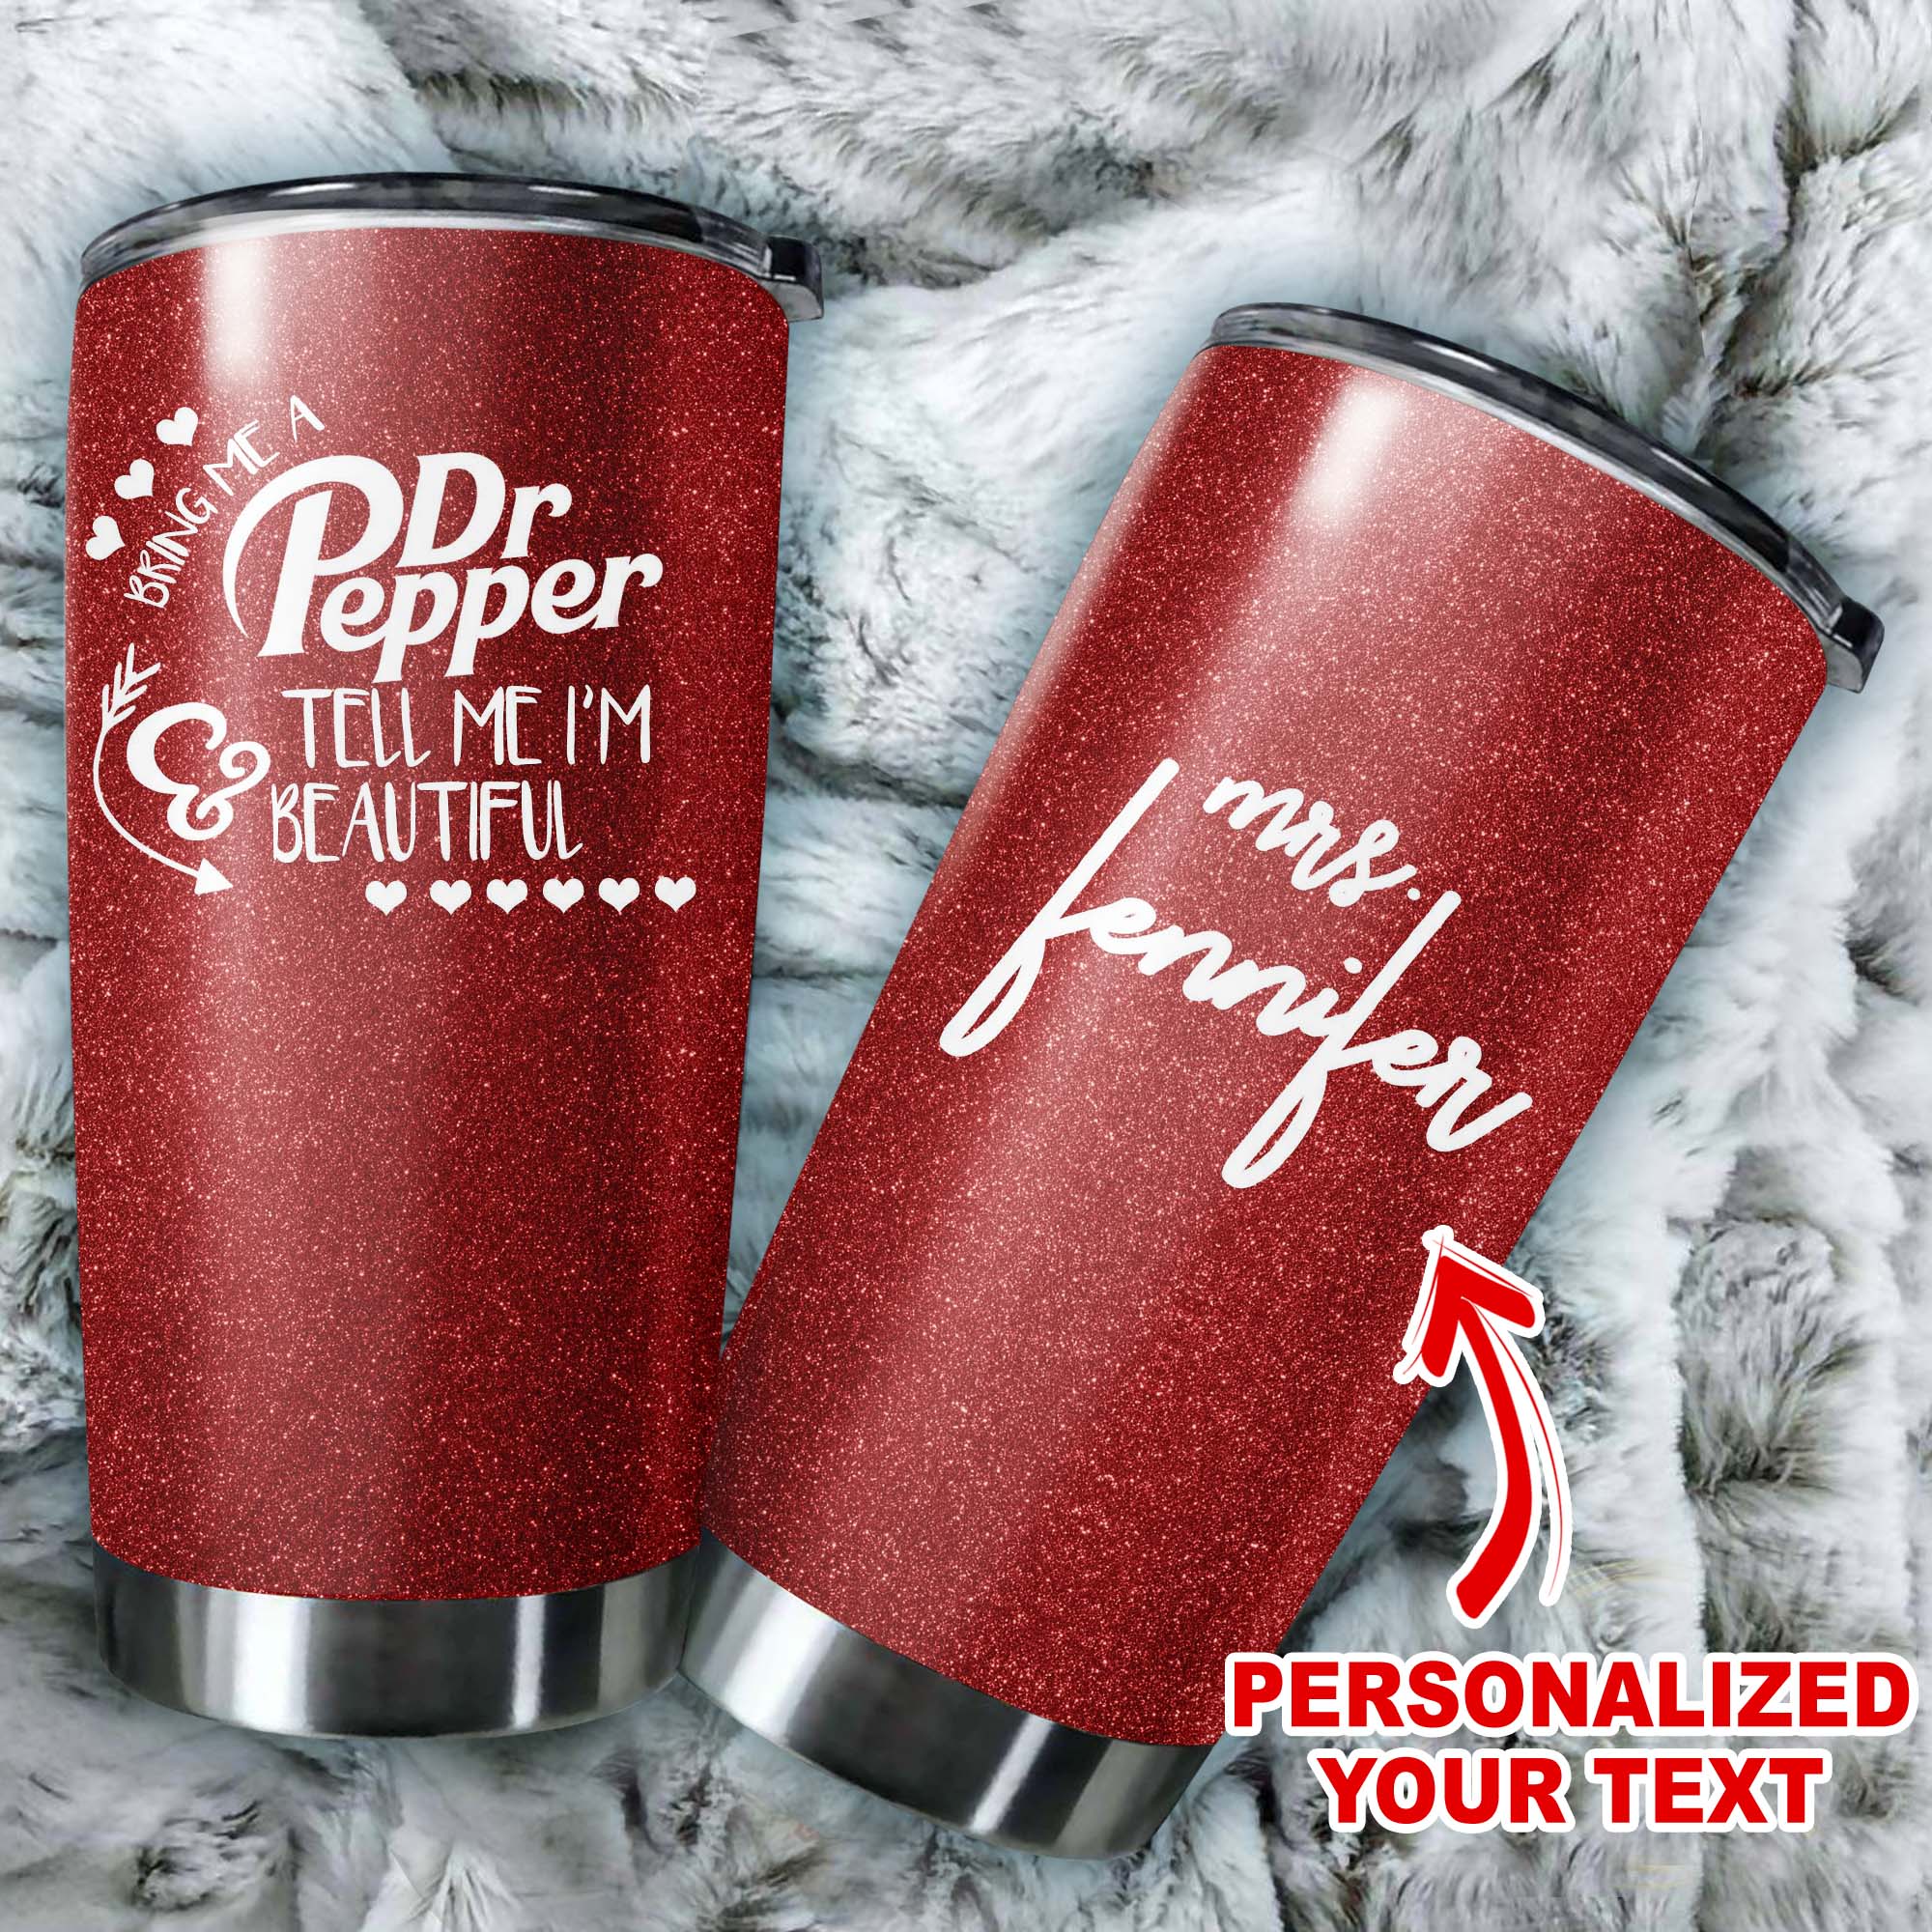 Personalized dr pepper tell me i'm beautiful all over printed tumbler 3